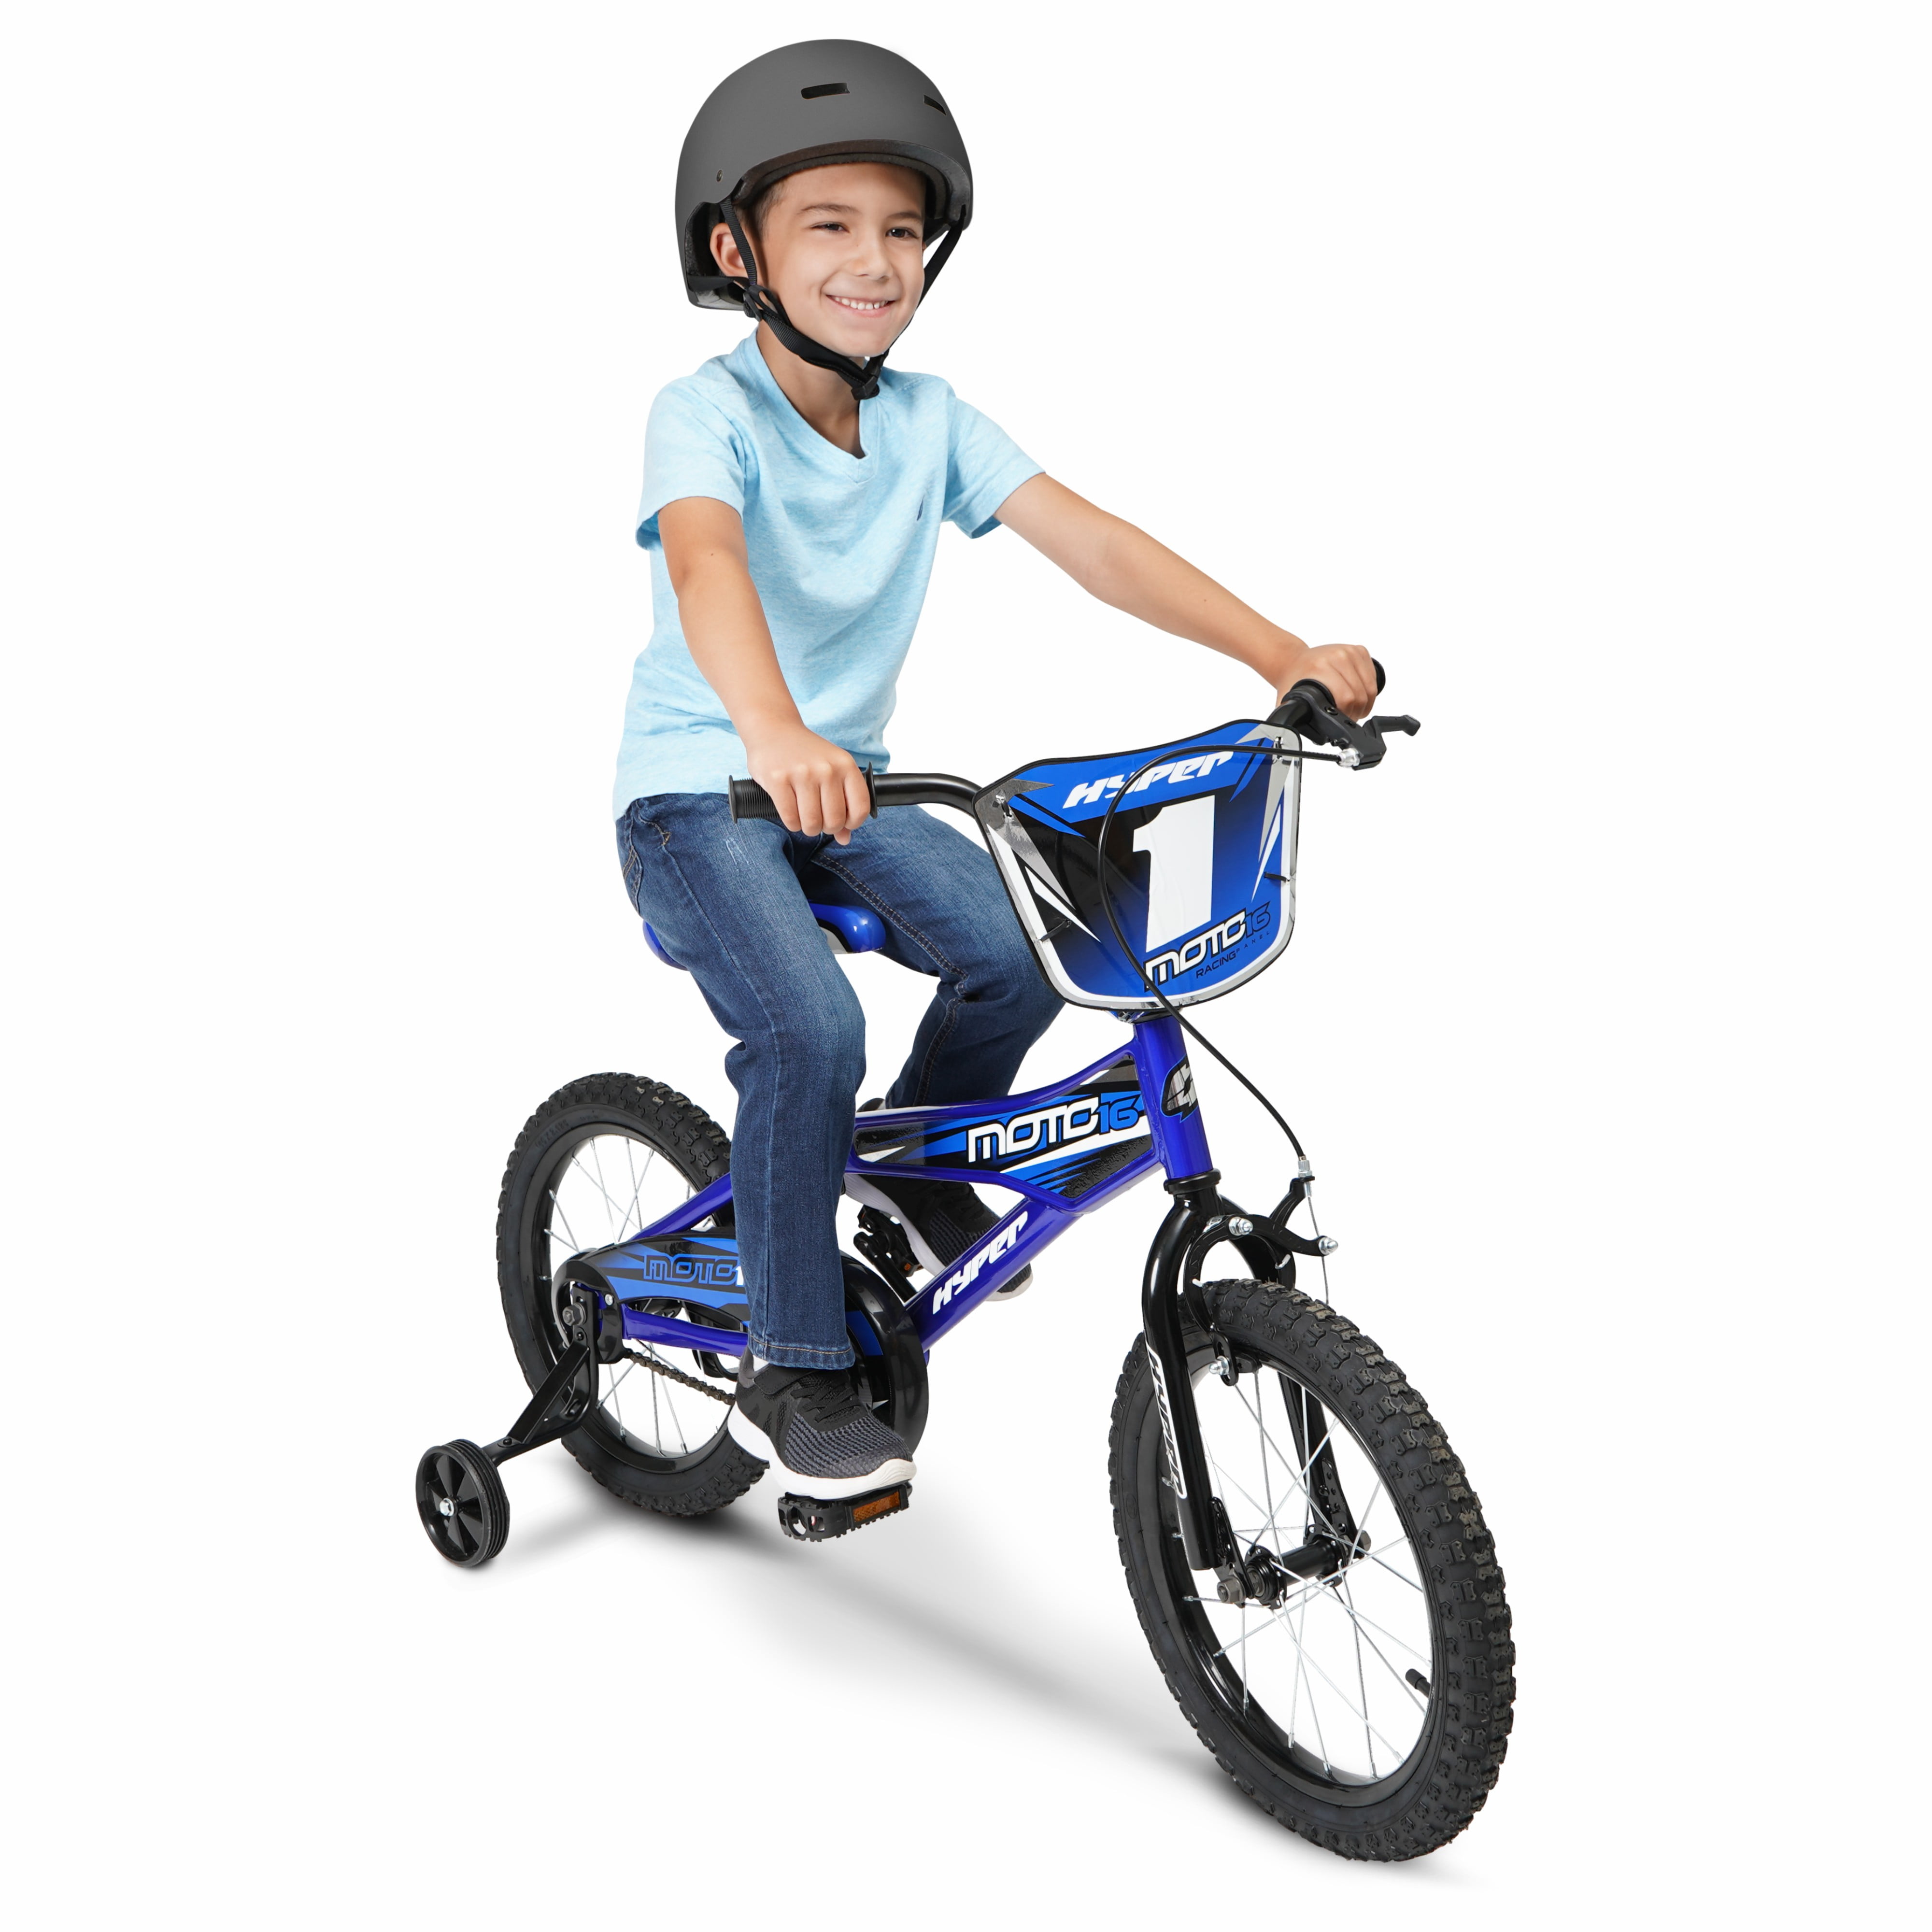 16 inch Kids Bike For Boys Children Bicycle with Training Wheels Christmas Gift 